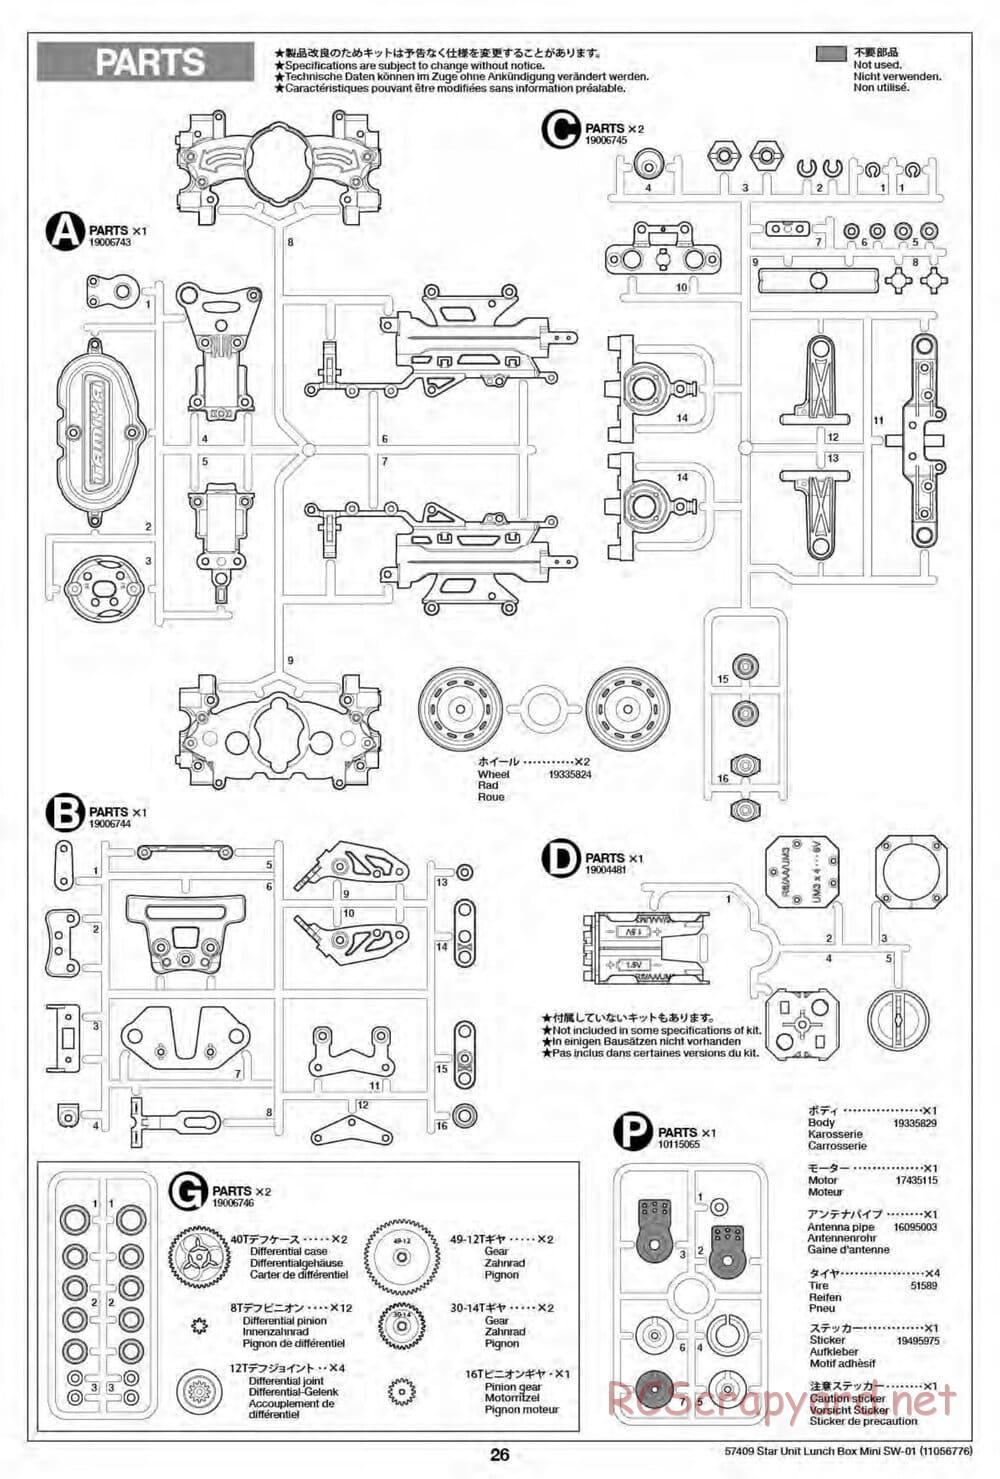 Tamiya - Lunch Box Mini - SW-01 Chassis - Manual - Page 26